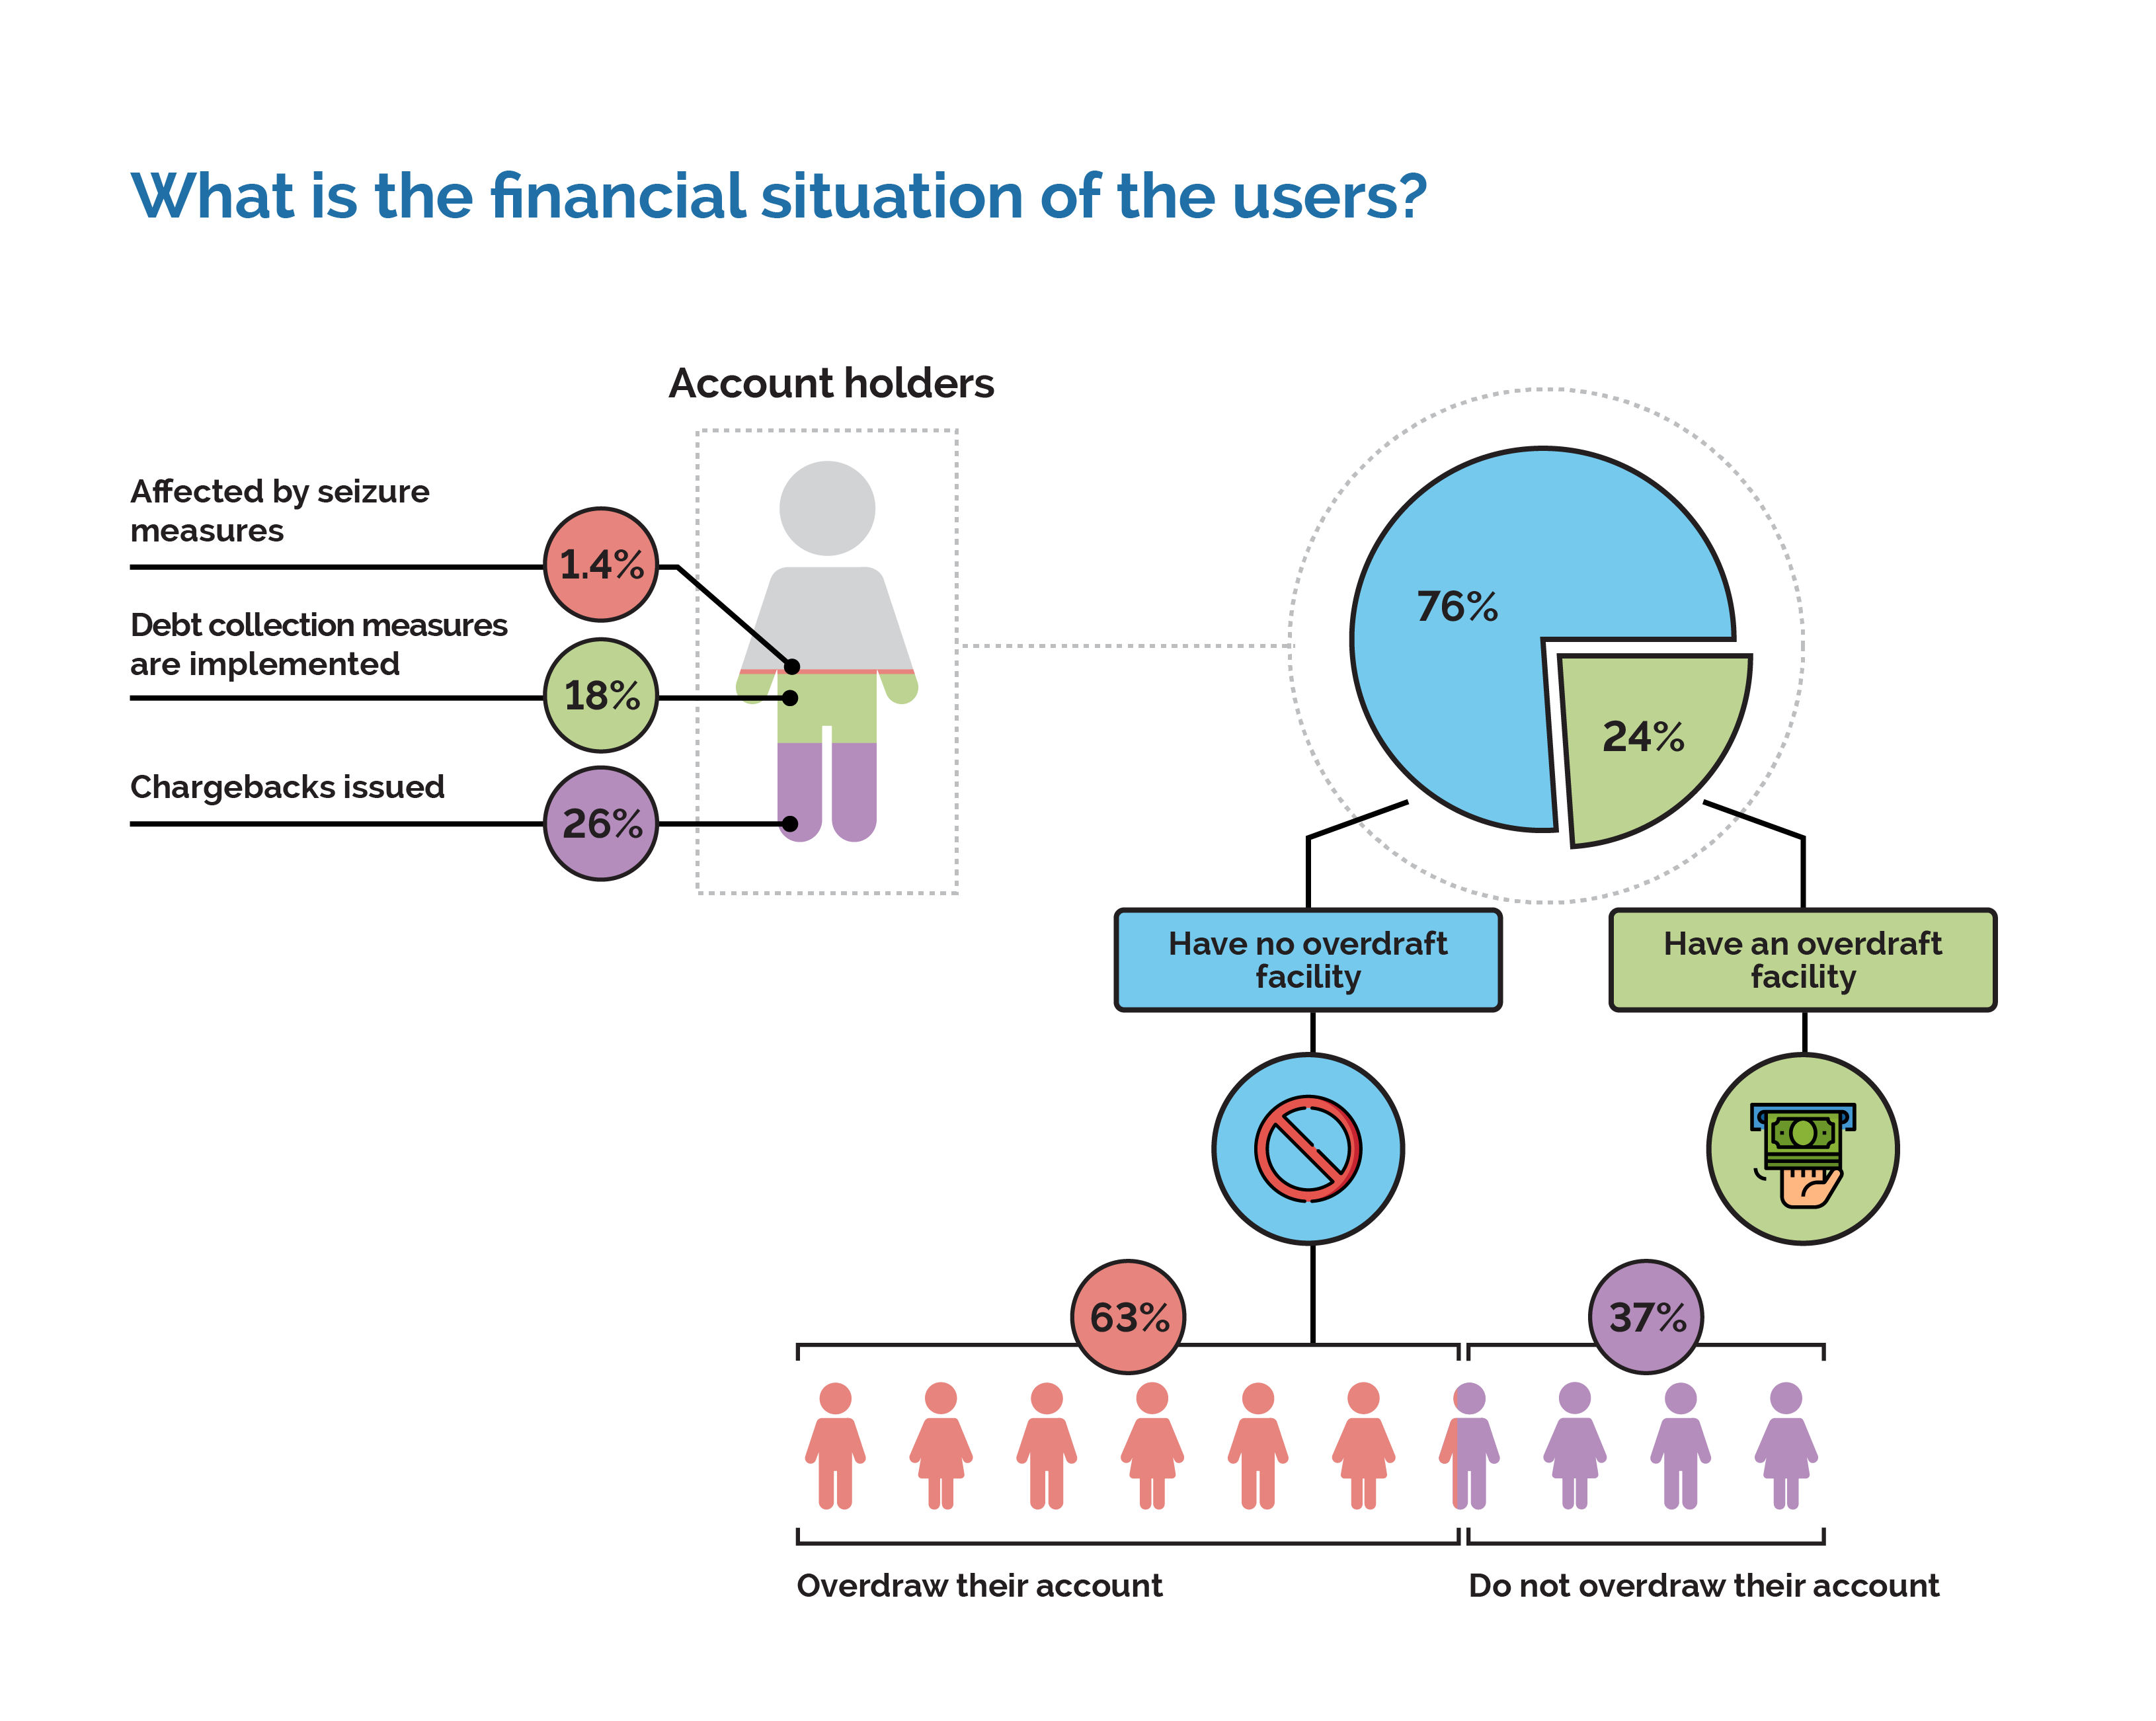 Financial Situation of the Users